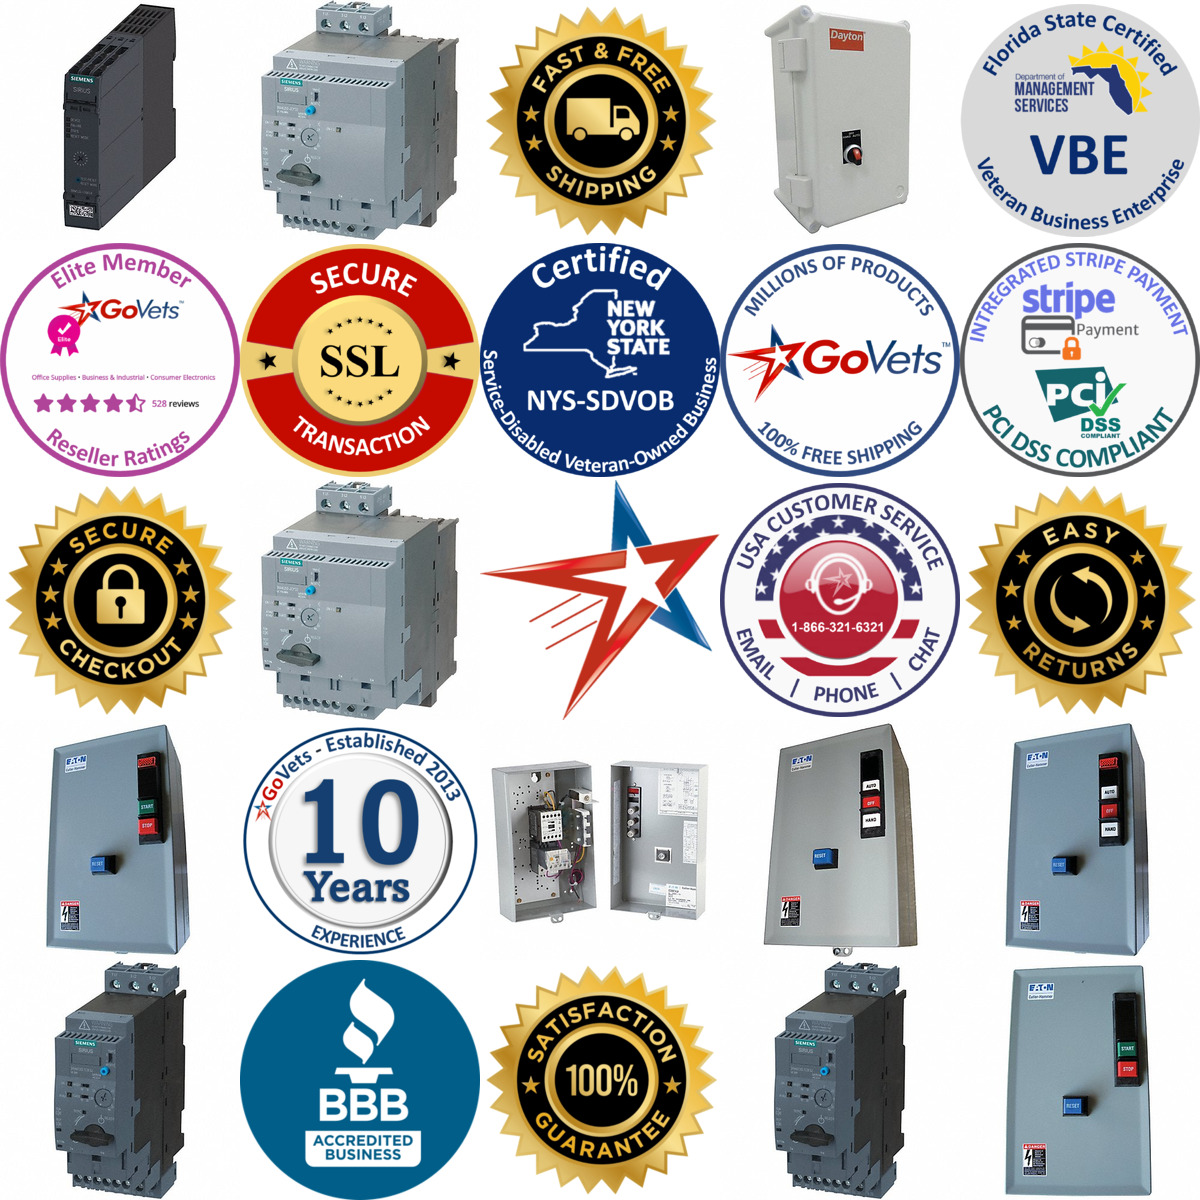 A selection of Iec Magnetic Motor Starters products on GoVets